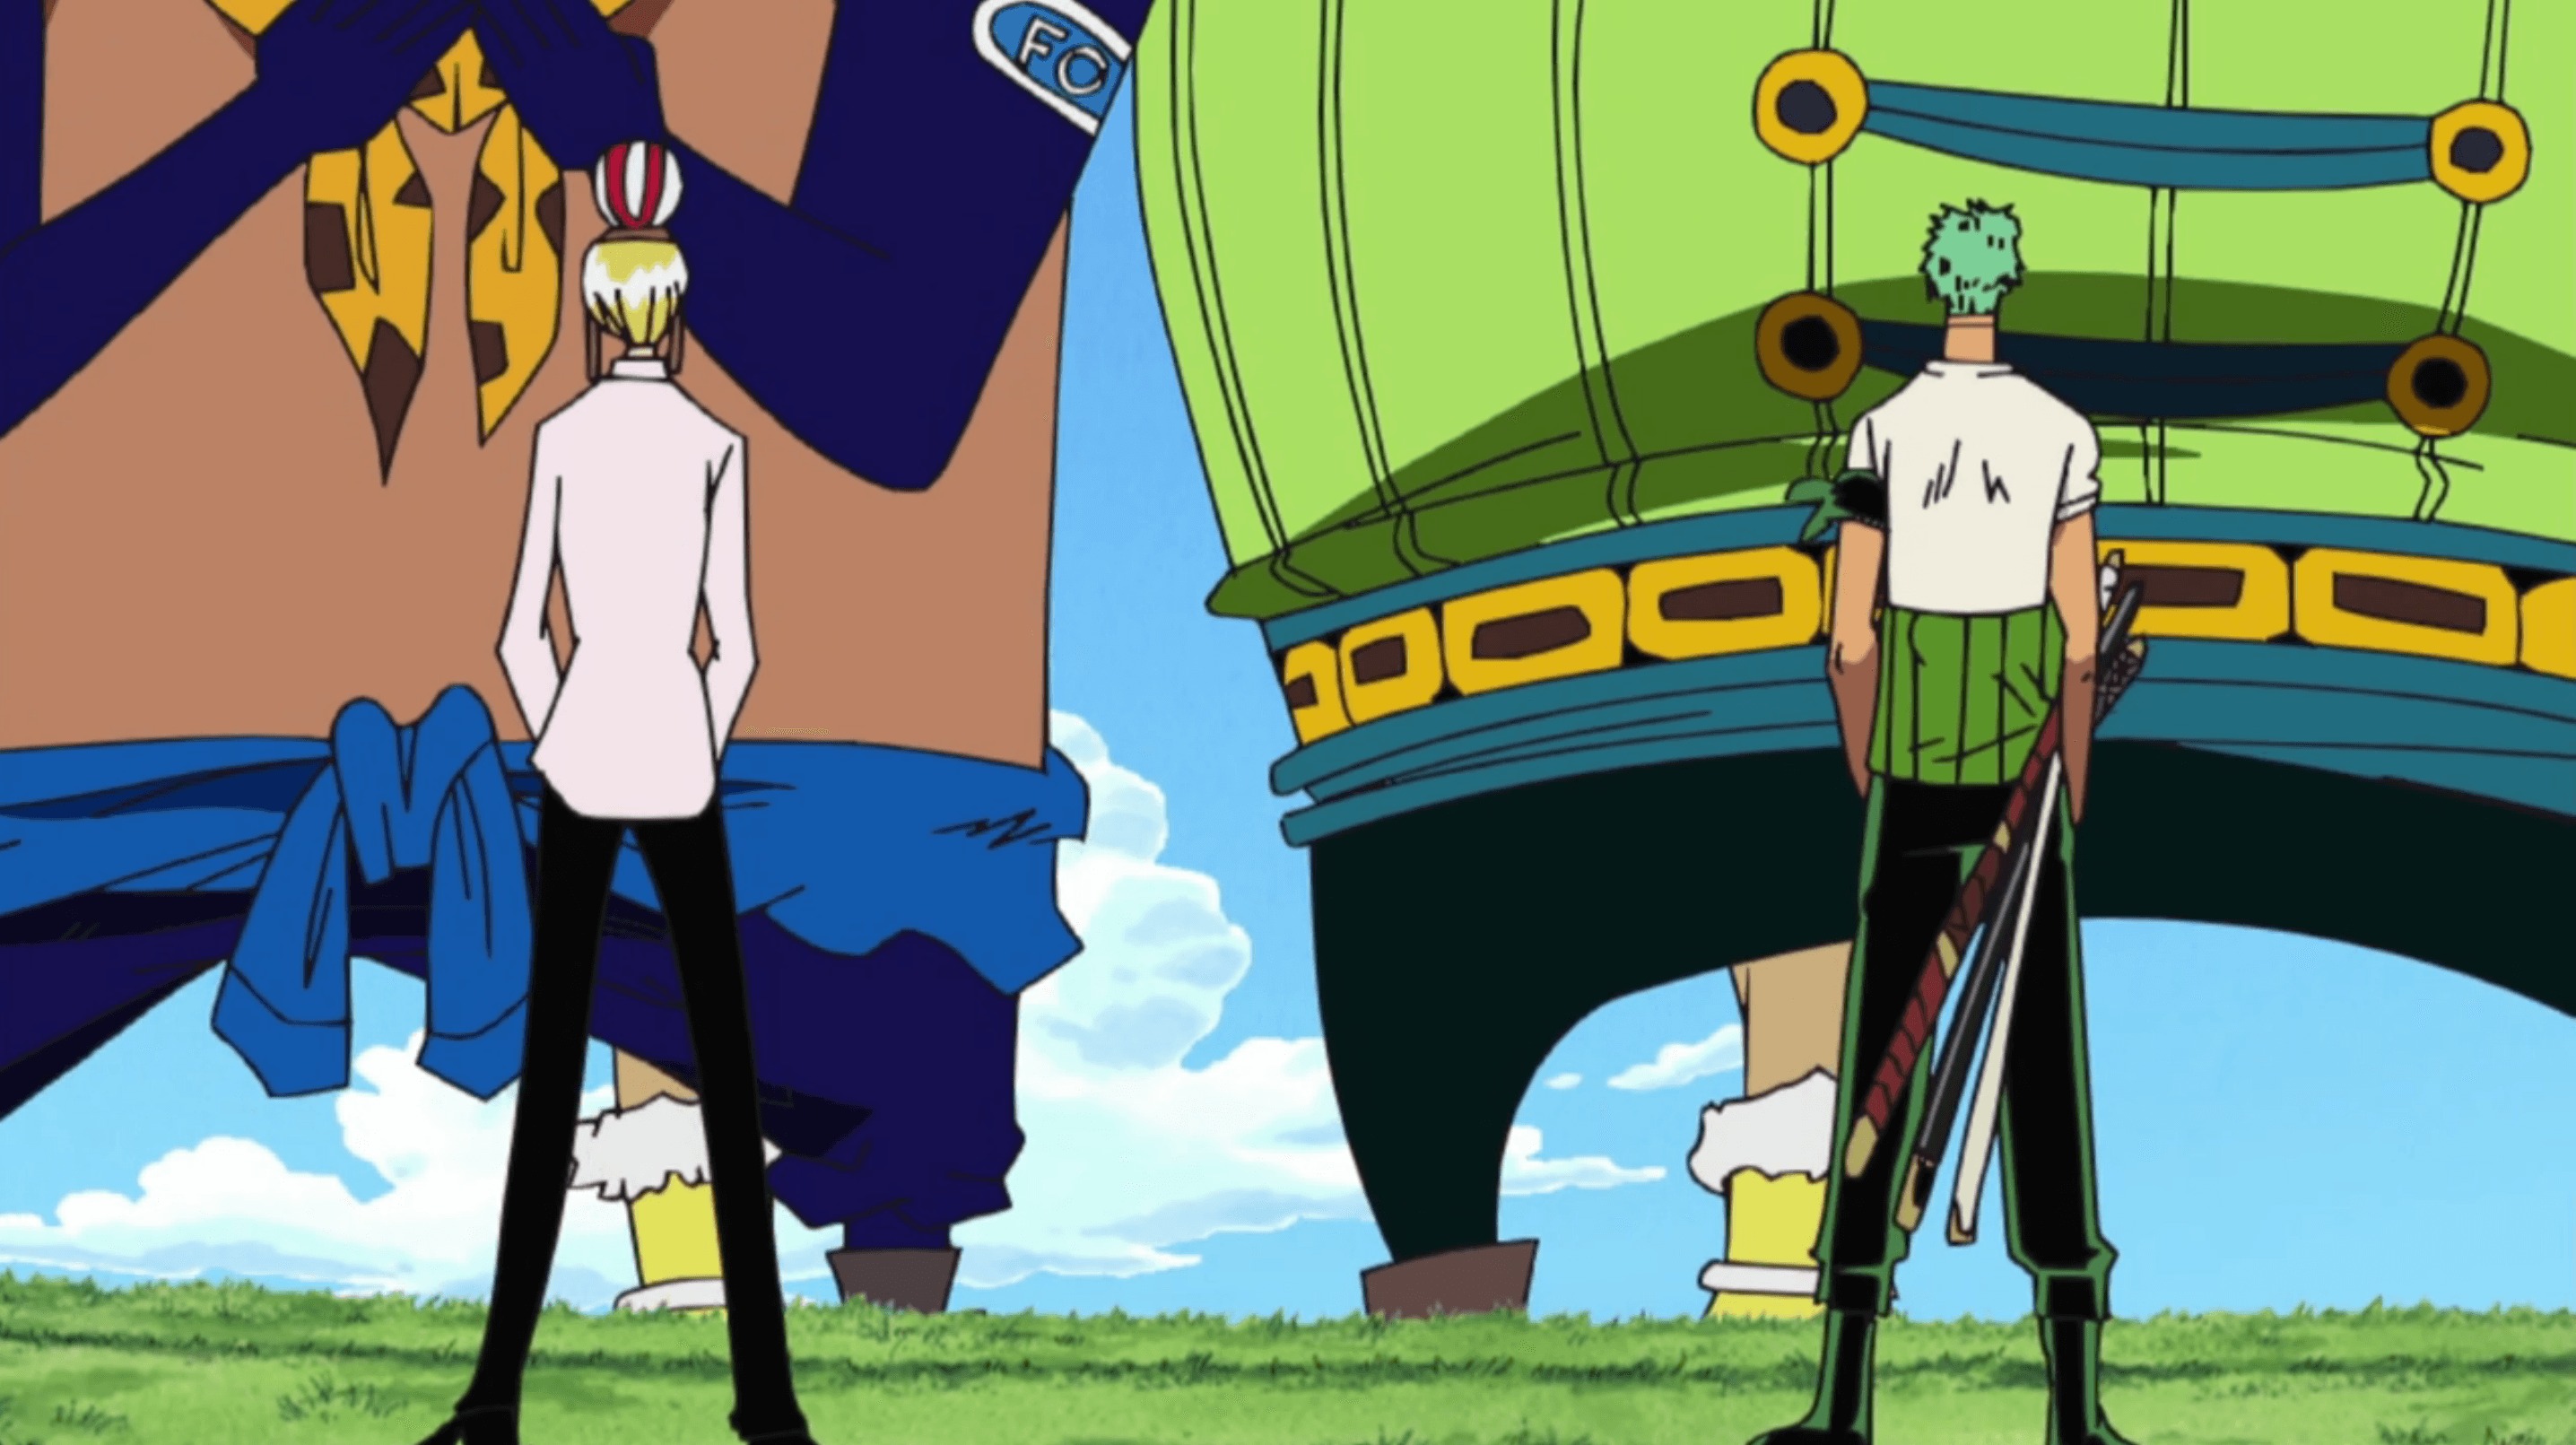 Zoro and Sanji: Friends and Rivals | ONE PIECE GOLD